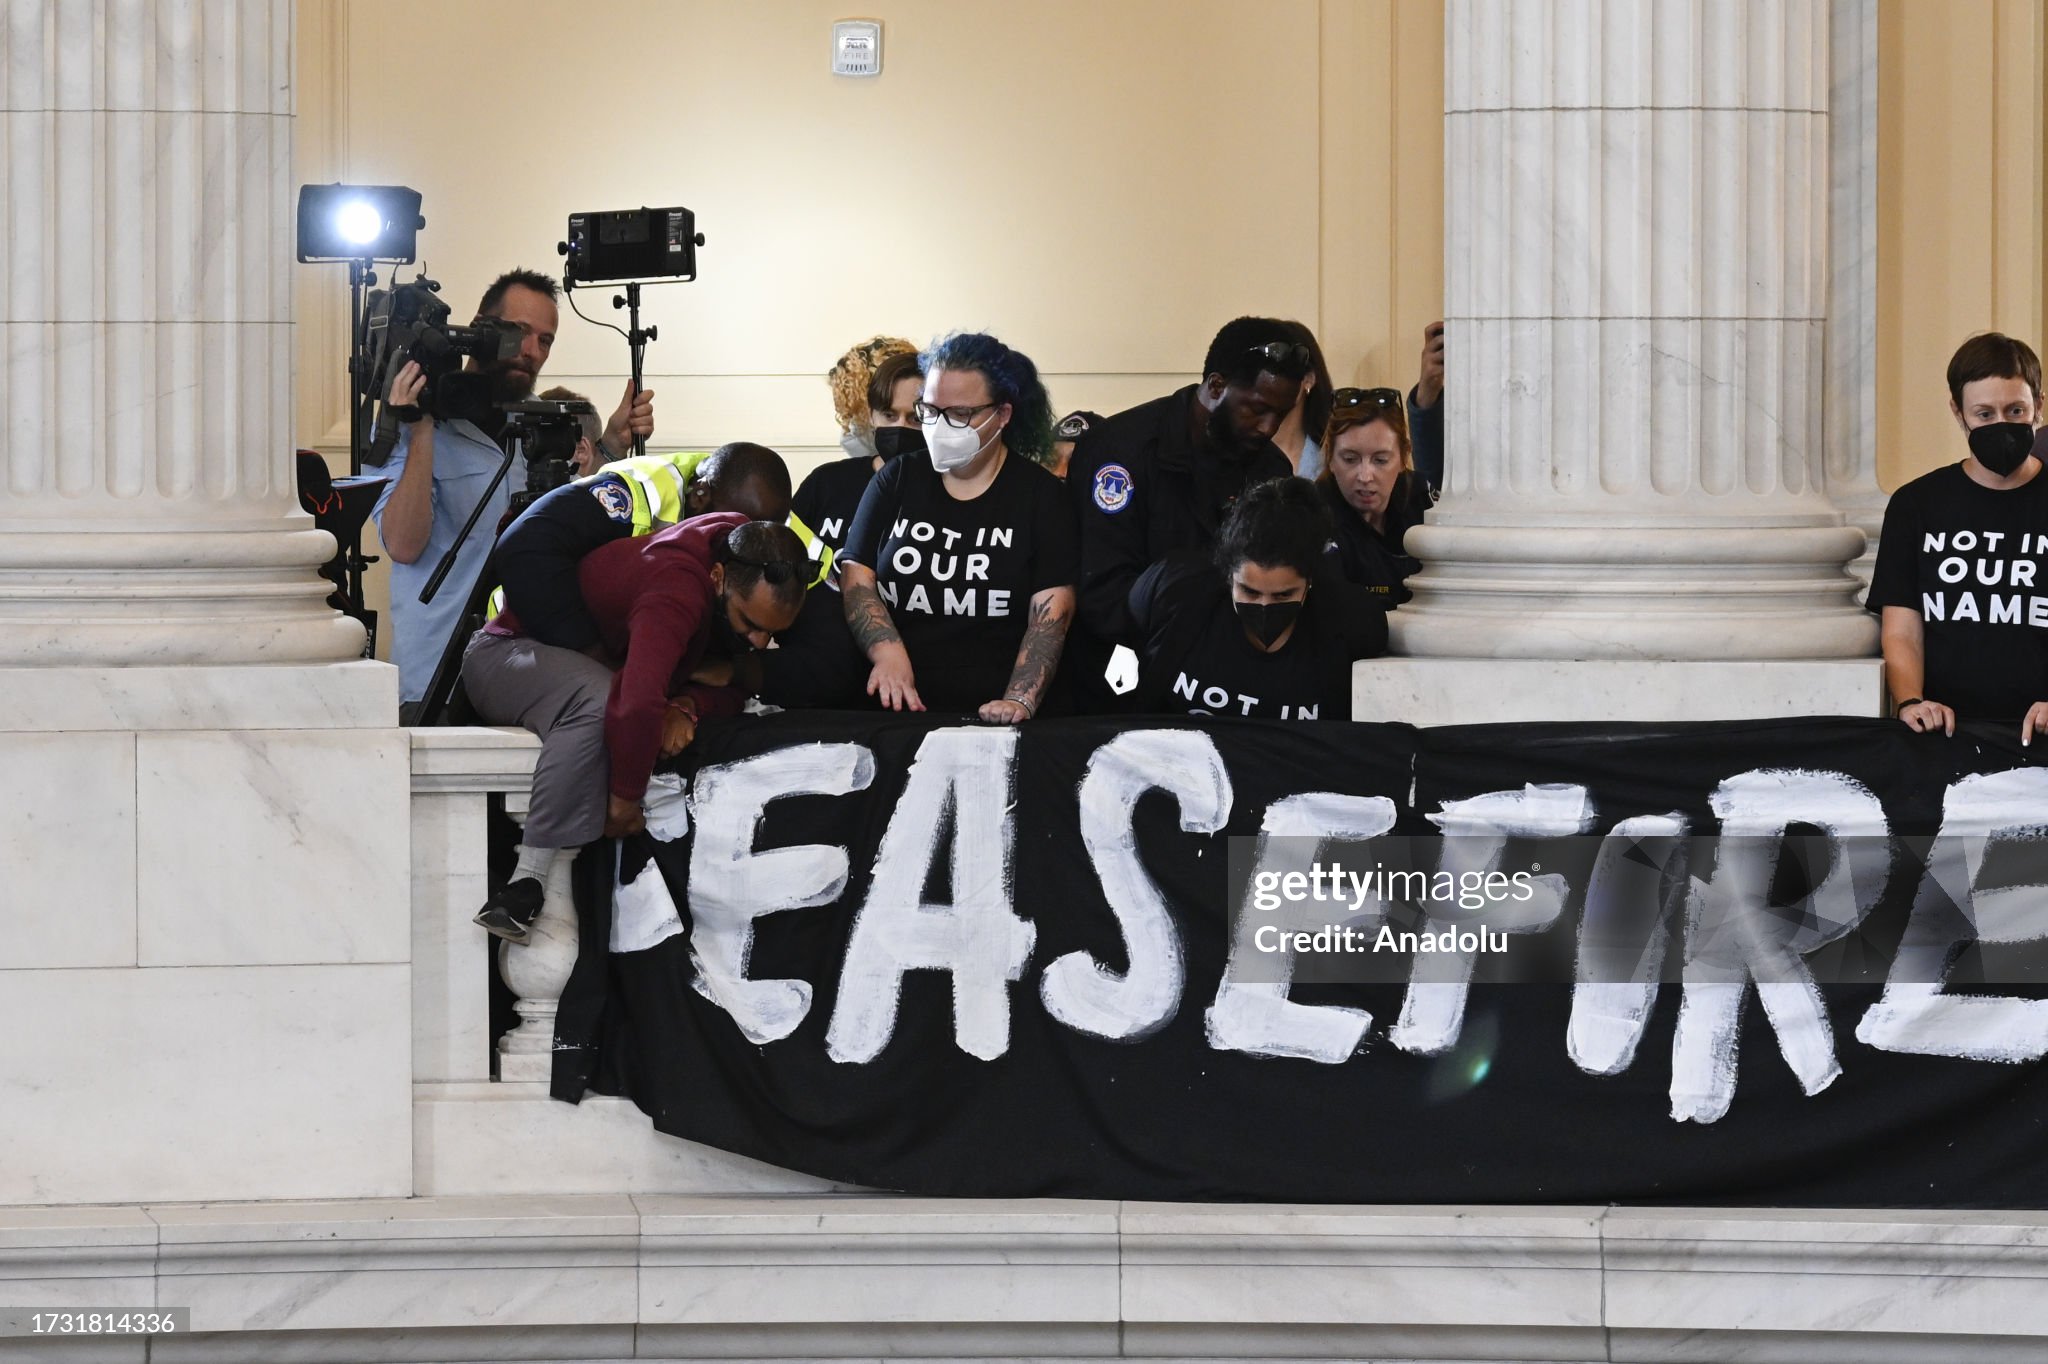 jewish-groups-face-arrests-at-us-congress-building-as-they-hold-pro-palestinian-protest.jpg